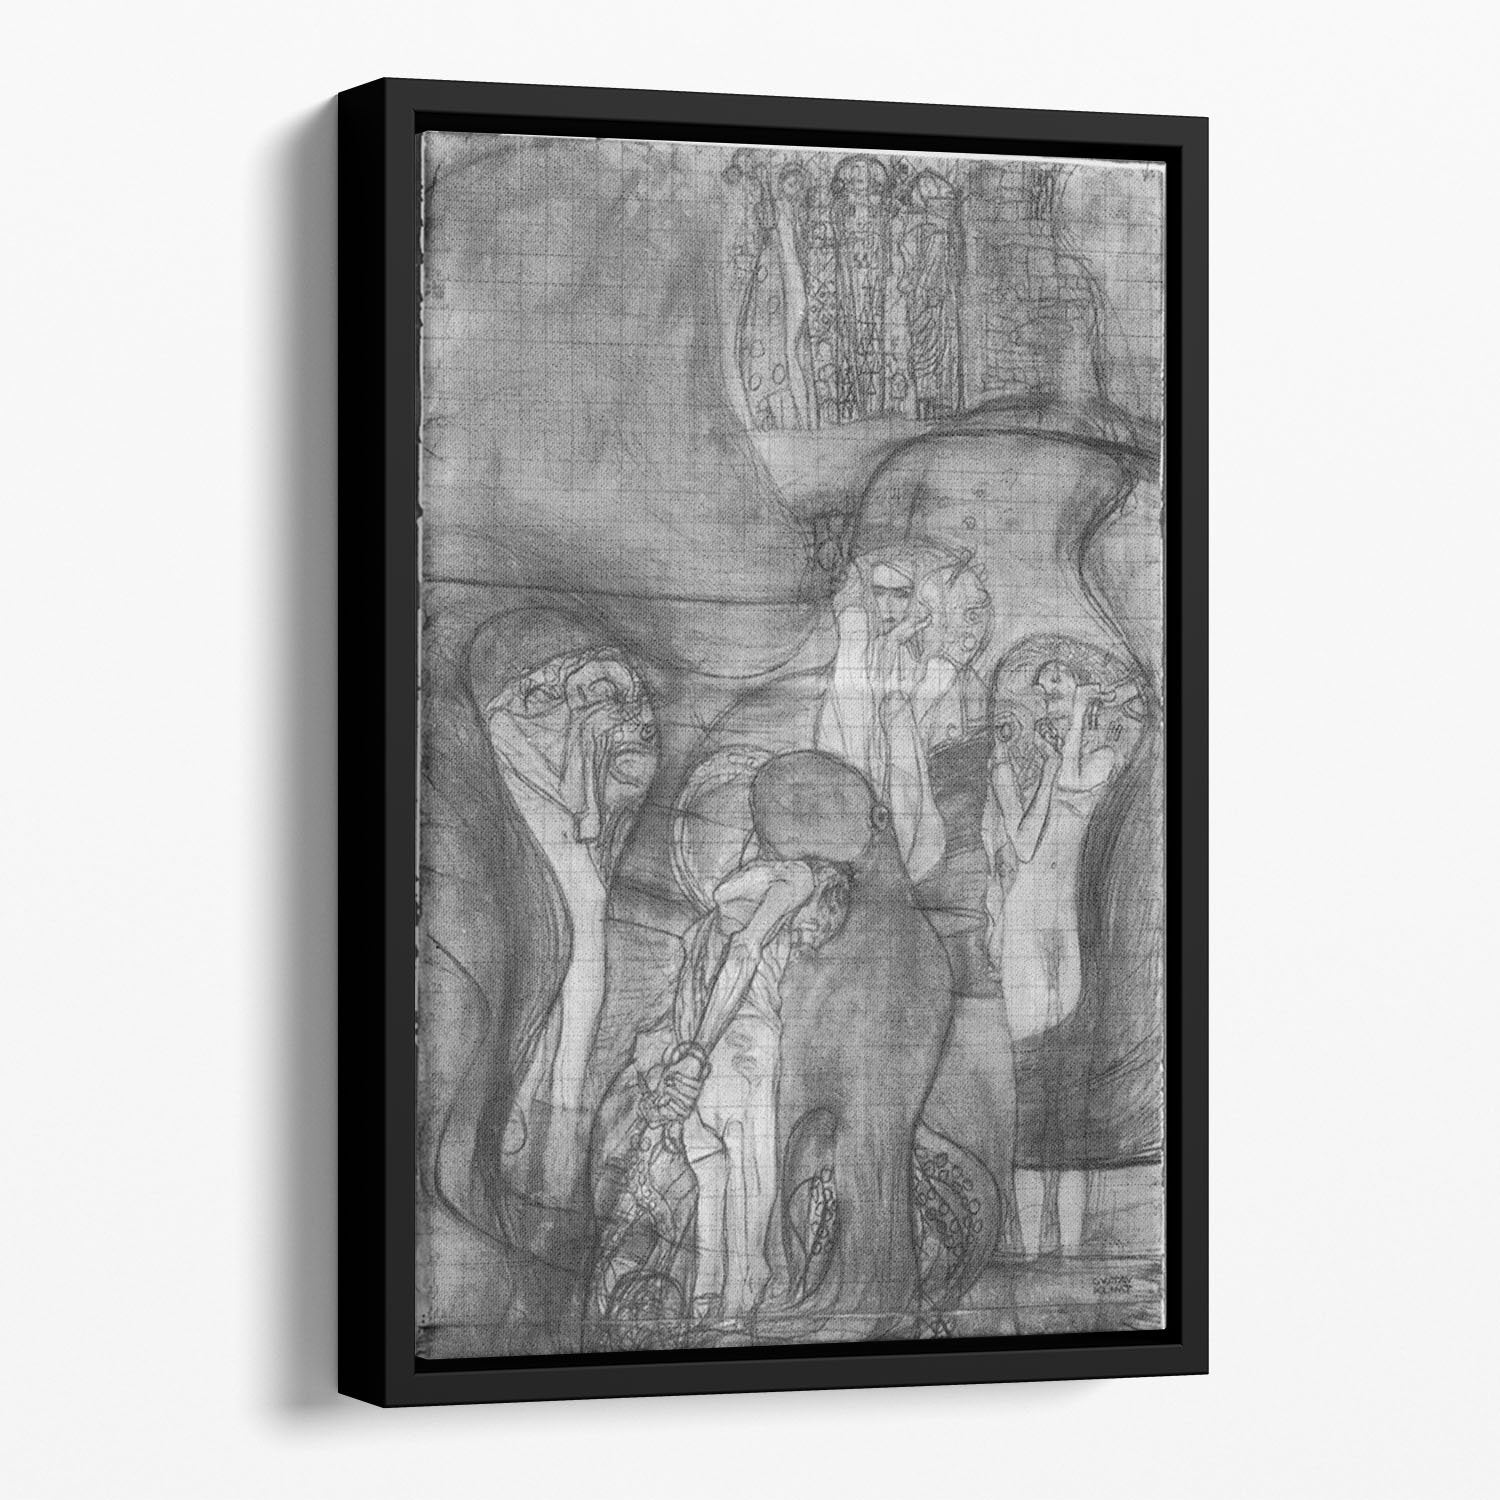 Composition draft of the law faculty image by Klimt Floating Framed Canvas